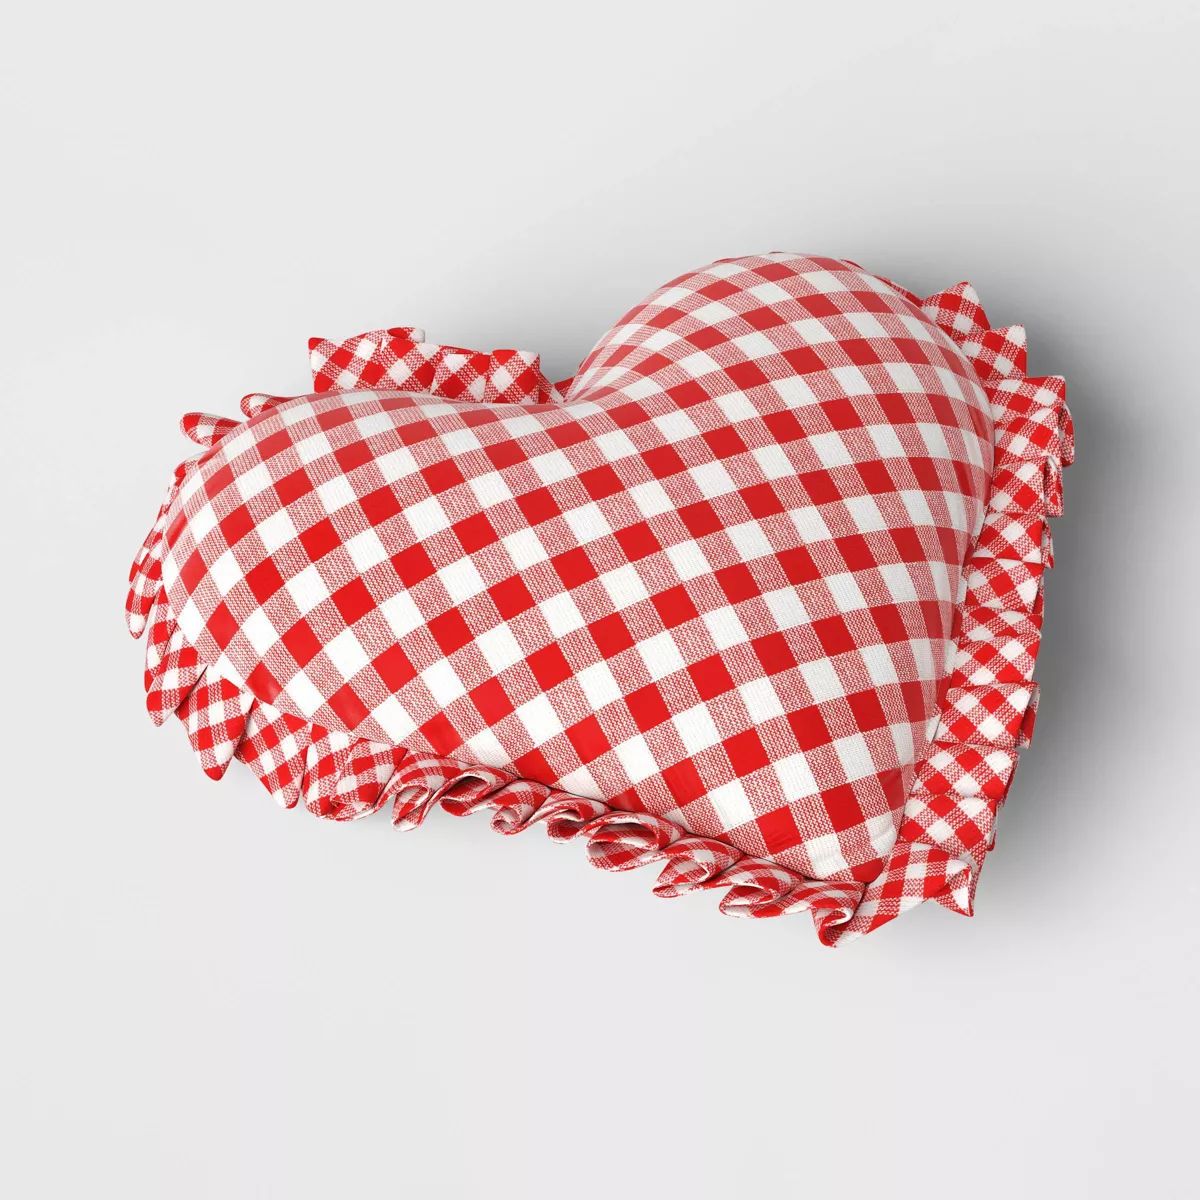 Shaped Woven Gingham Heart Throw Pillow with Ruffled Trim Red/Ivory - Threshold™ | Target